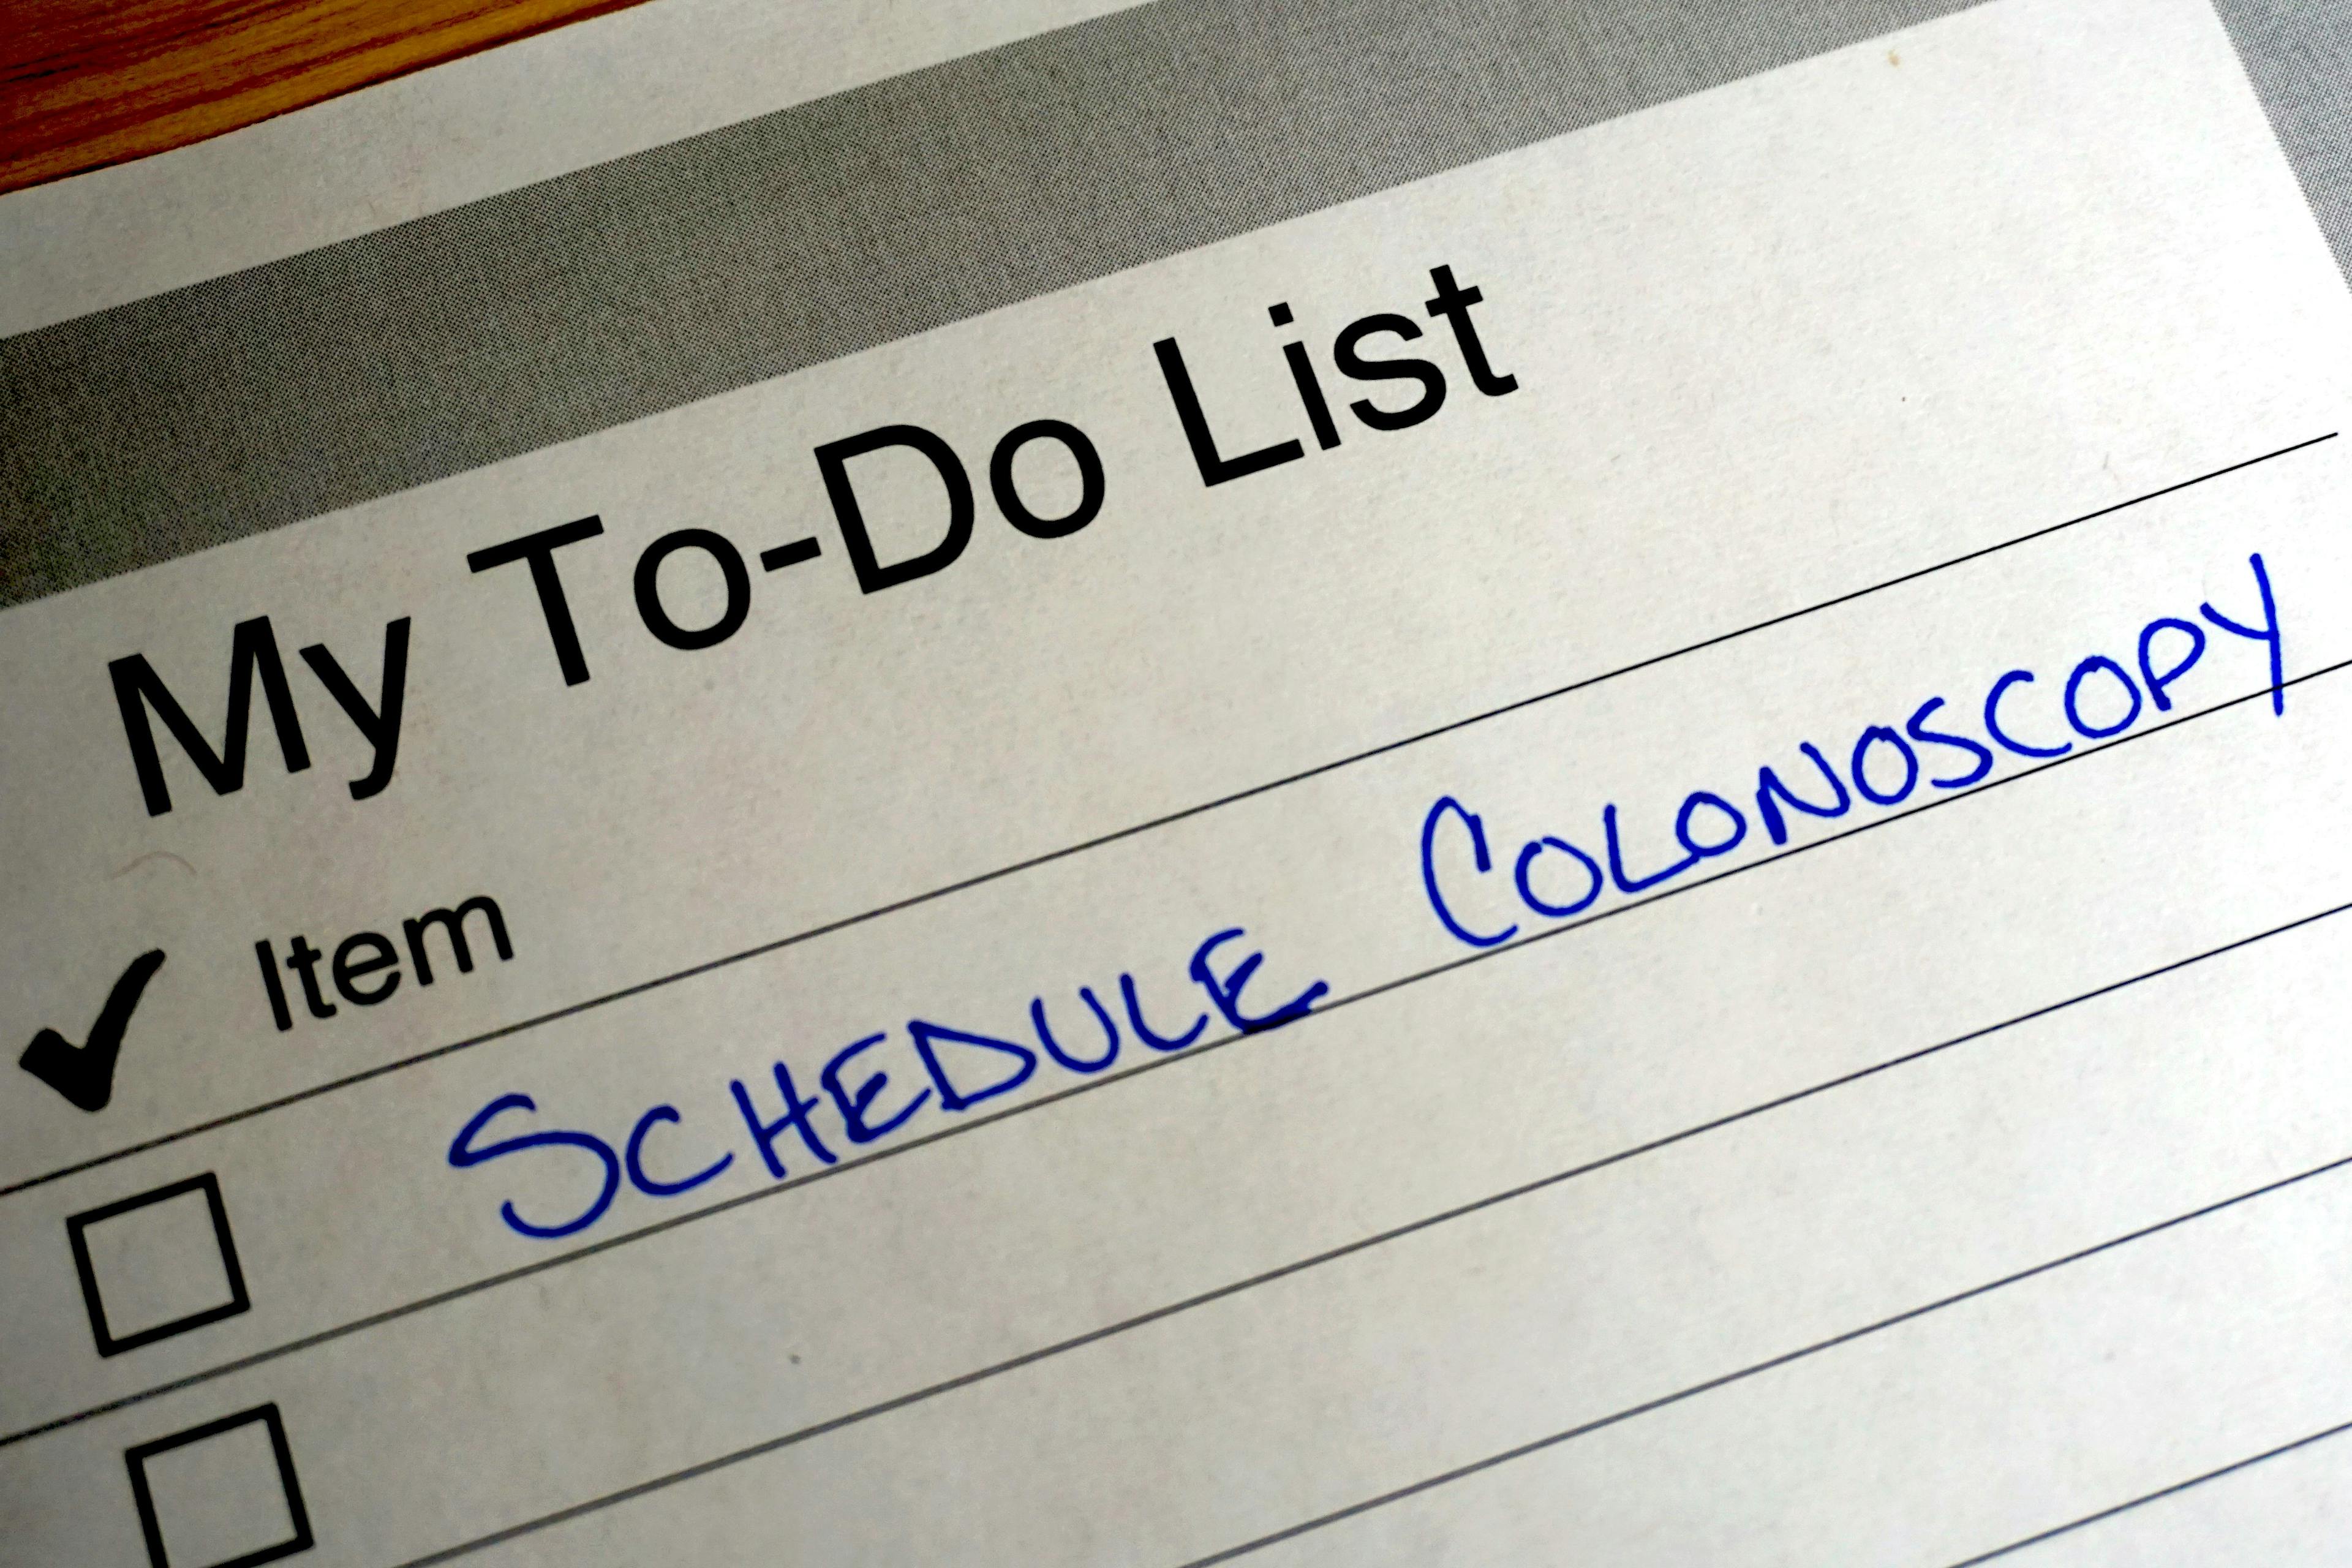 Handwritten reminder on a to do list to schedule a colonoscopy | Image credit: OntheRun Photo - stock.adobe.com